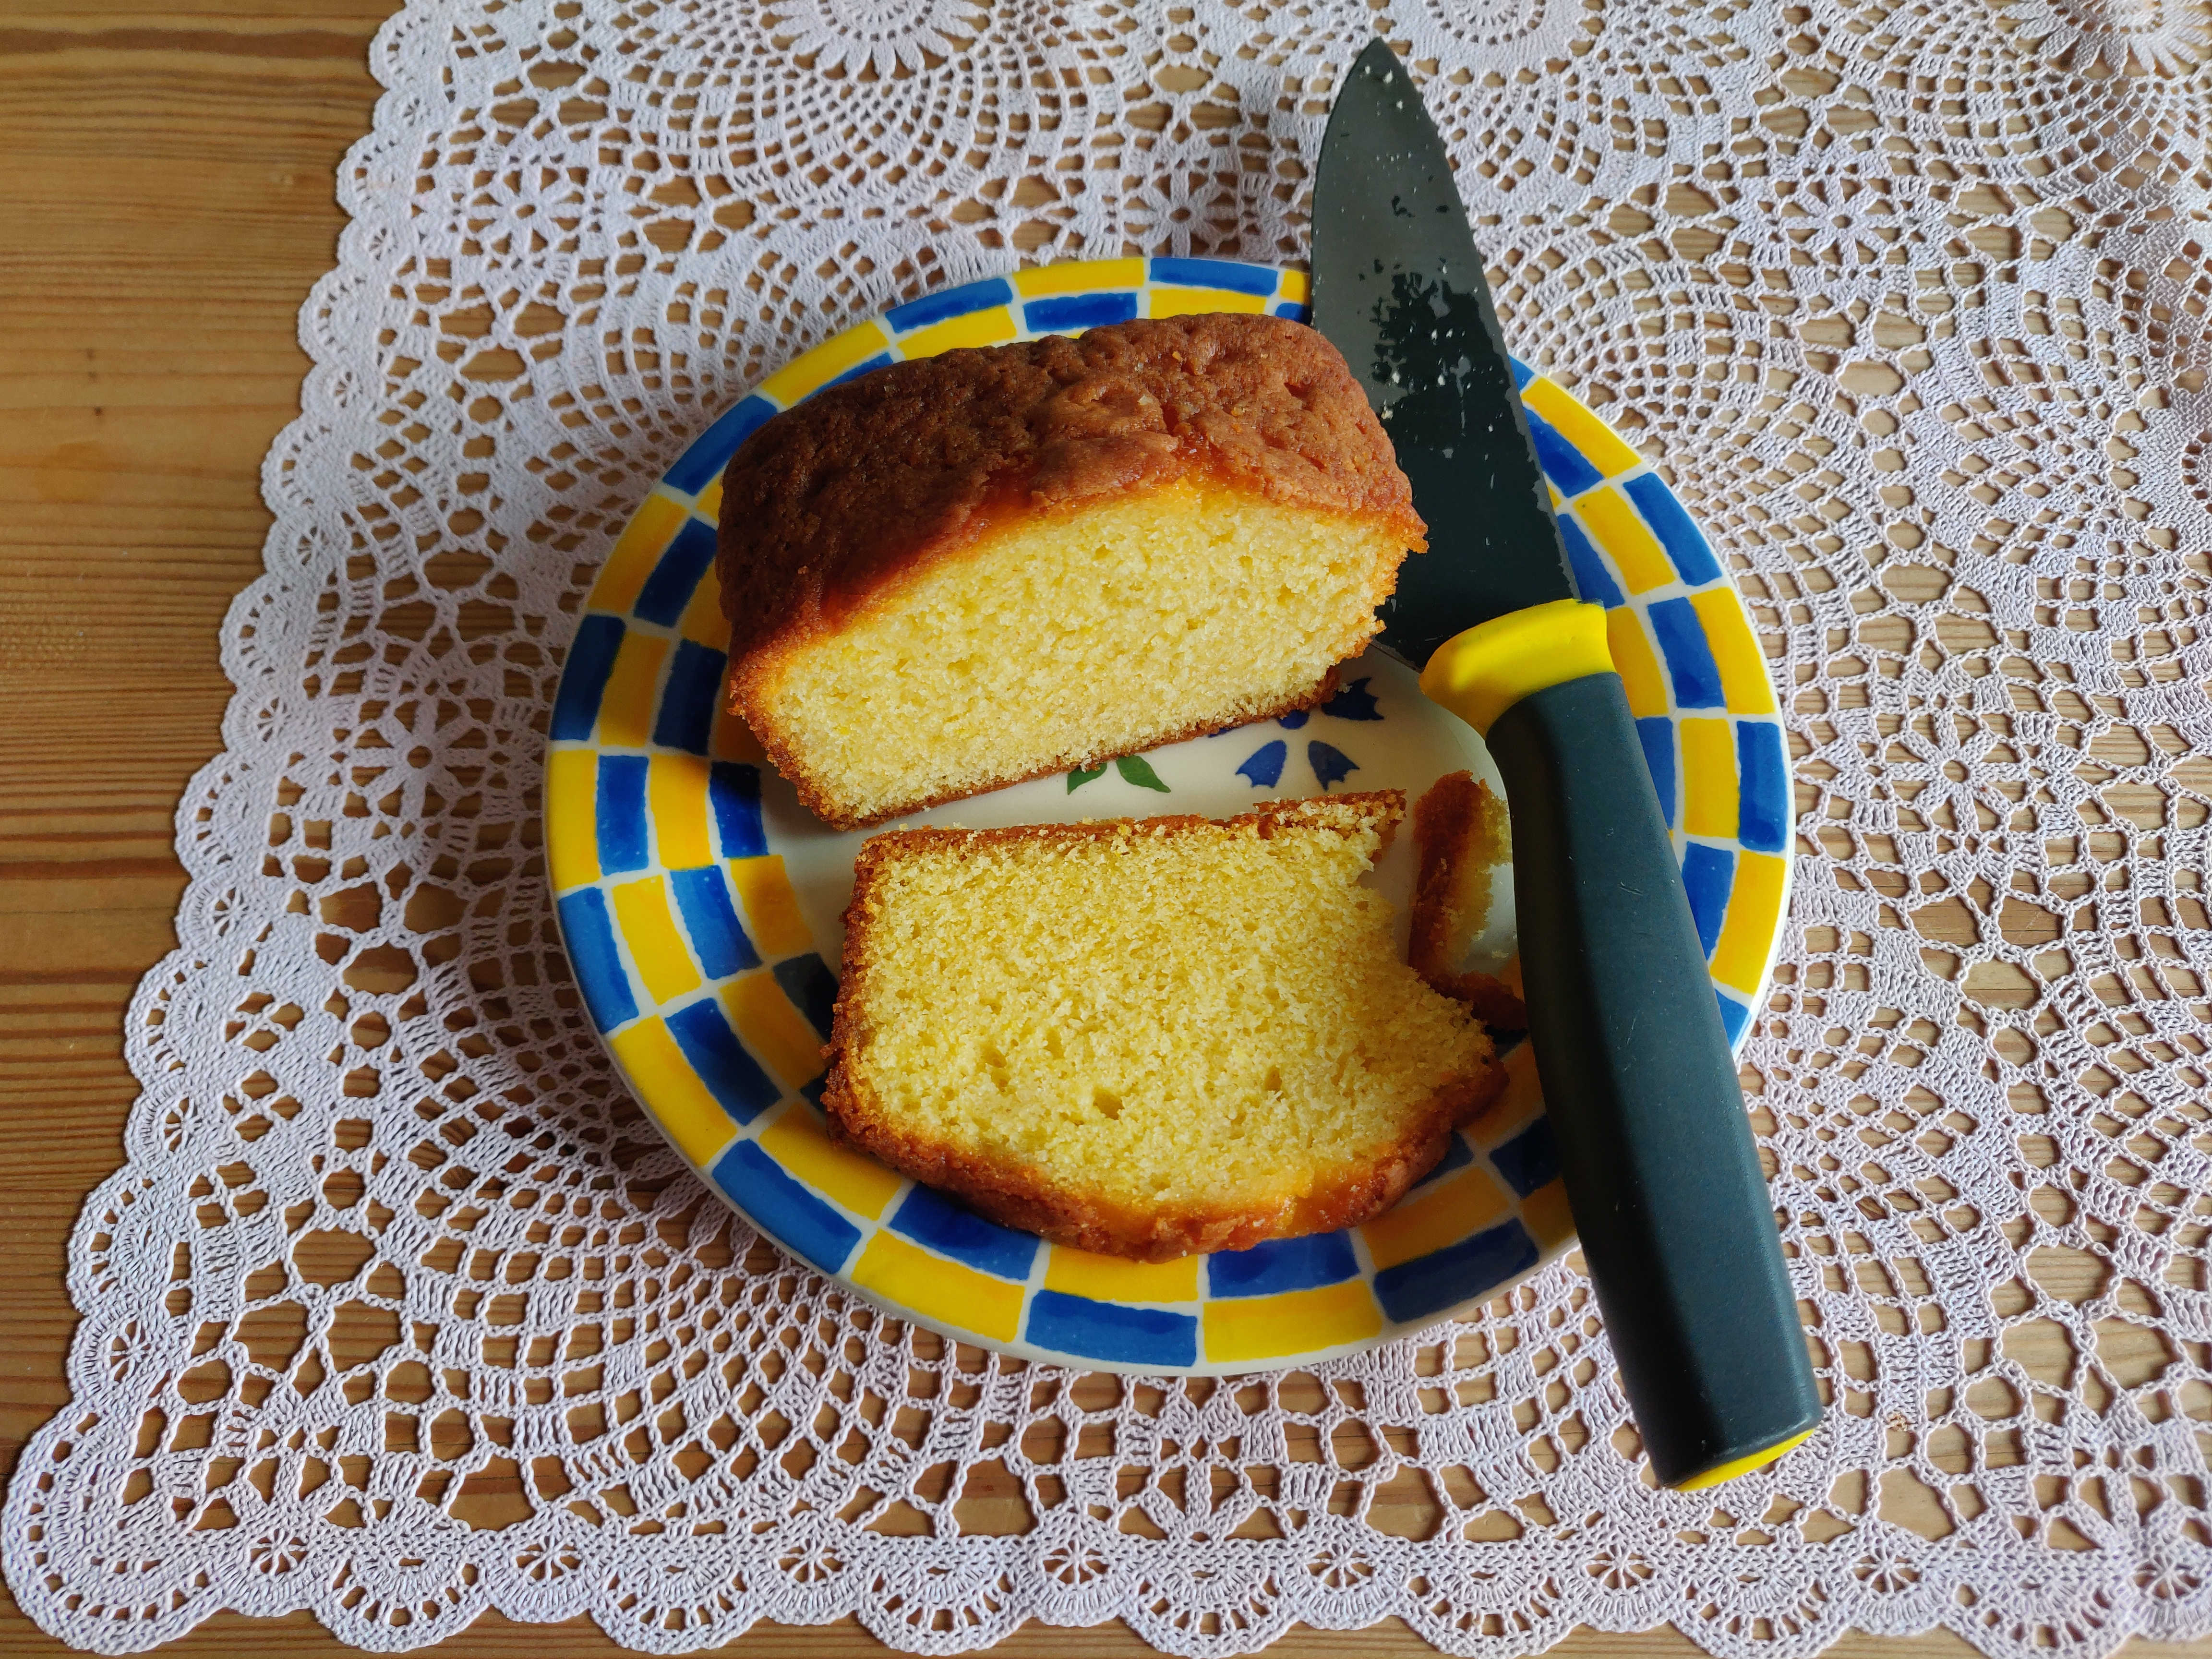 What's left of the lemon drizzle cake